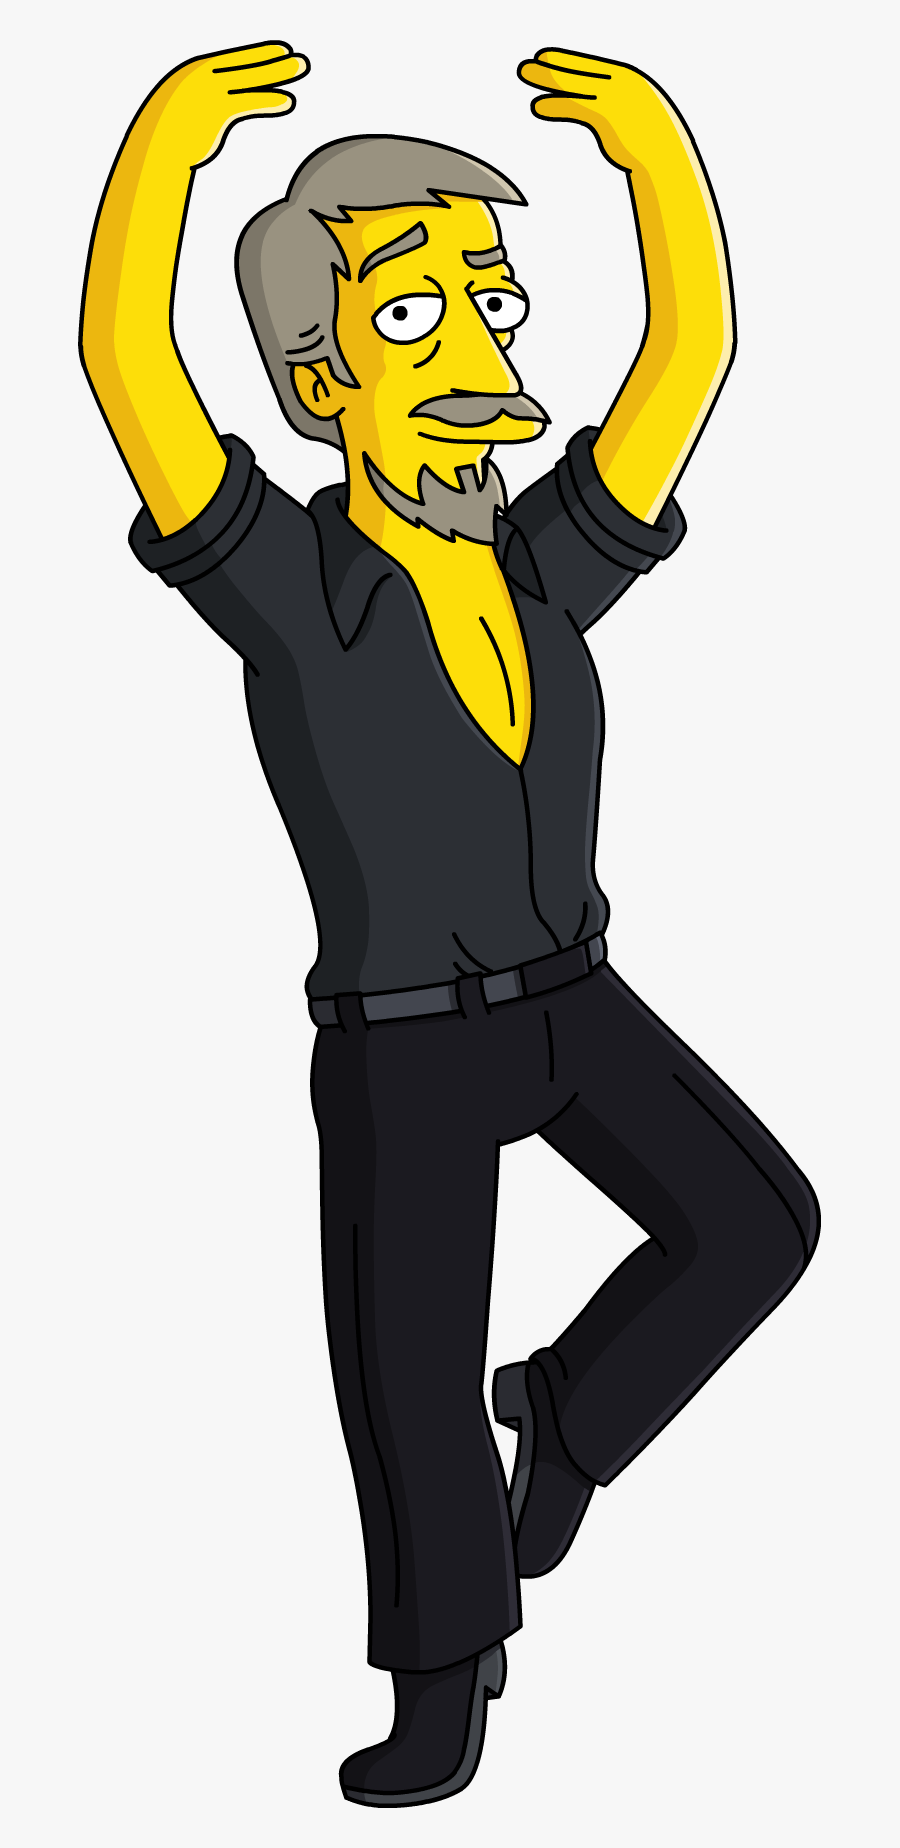 Os Simpsons Chazz Busby, Transparent Clipart